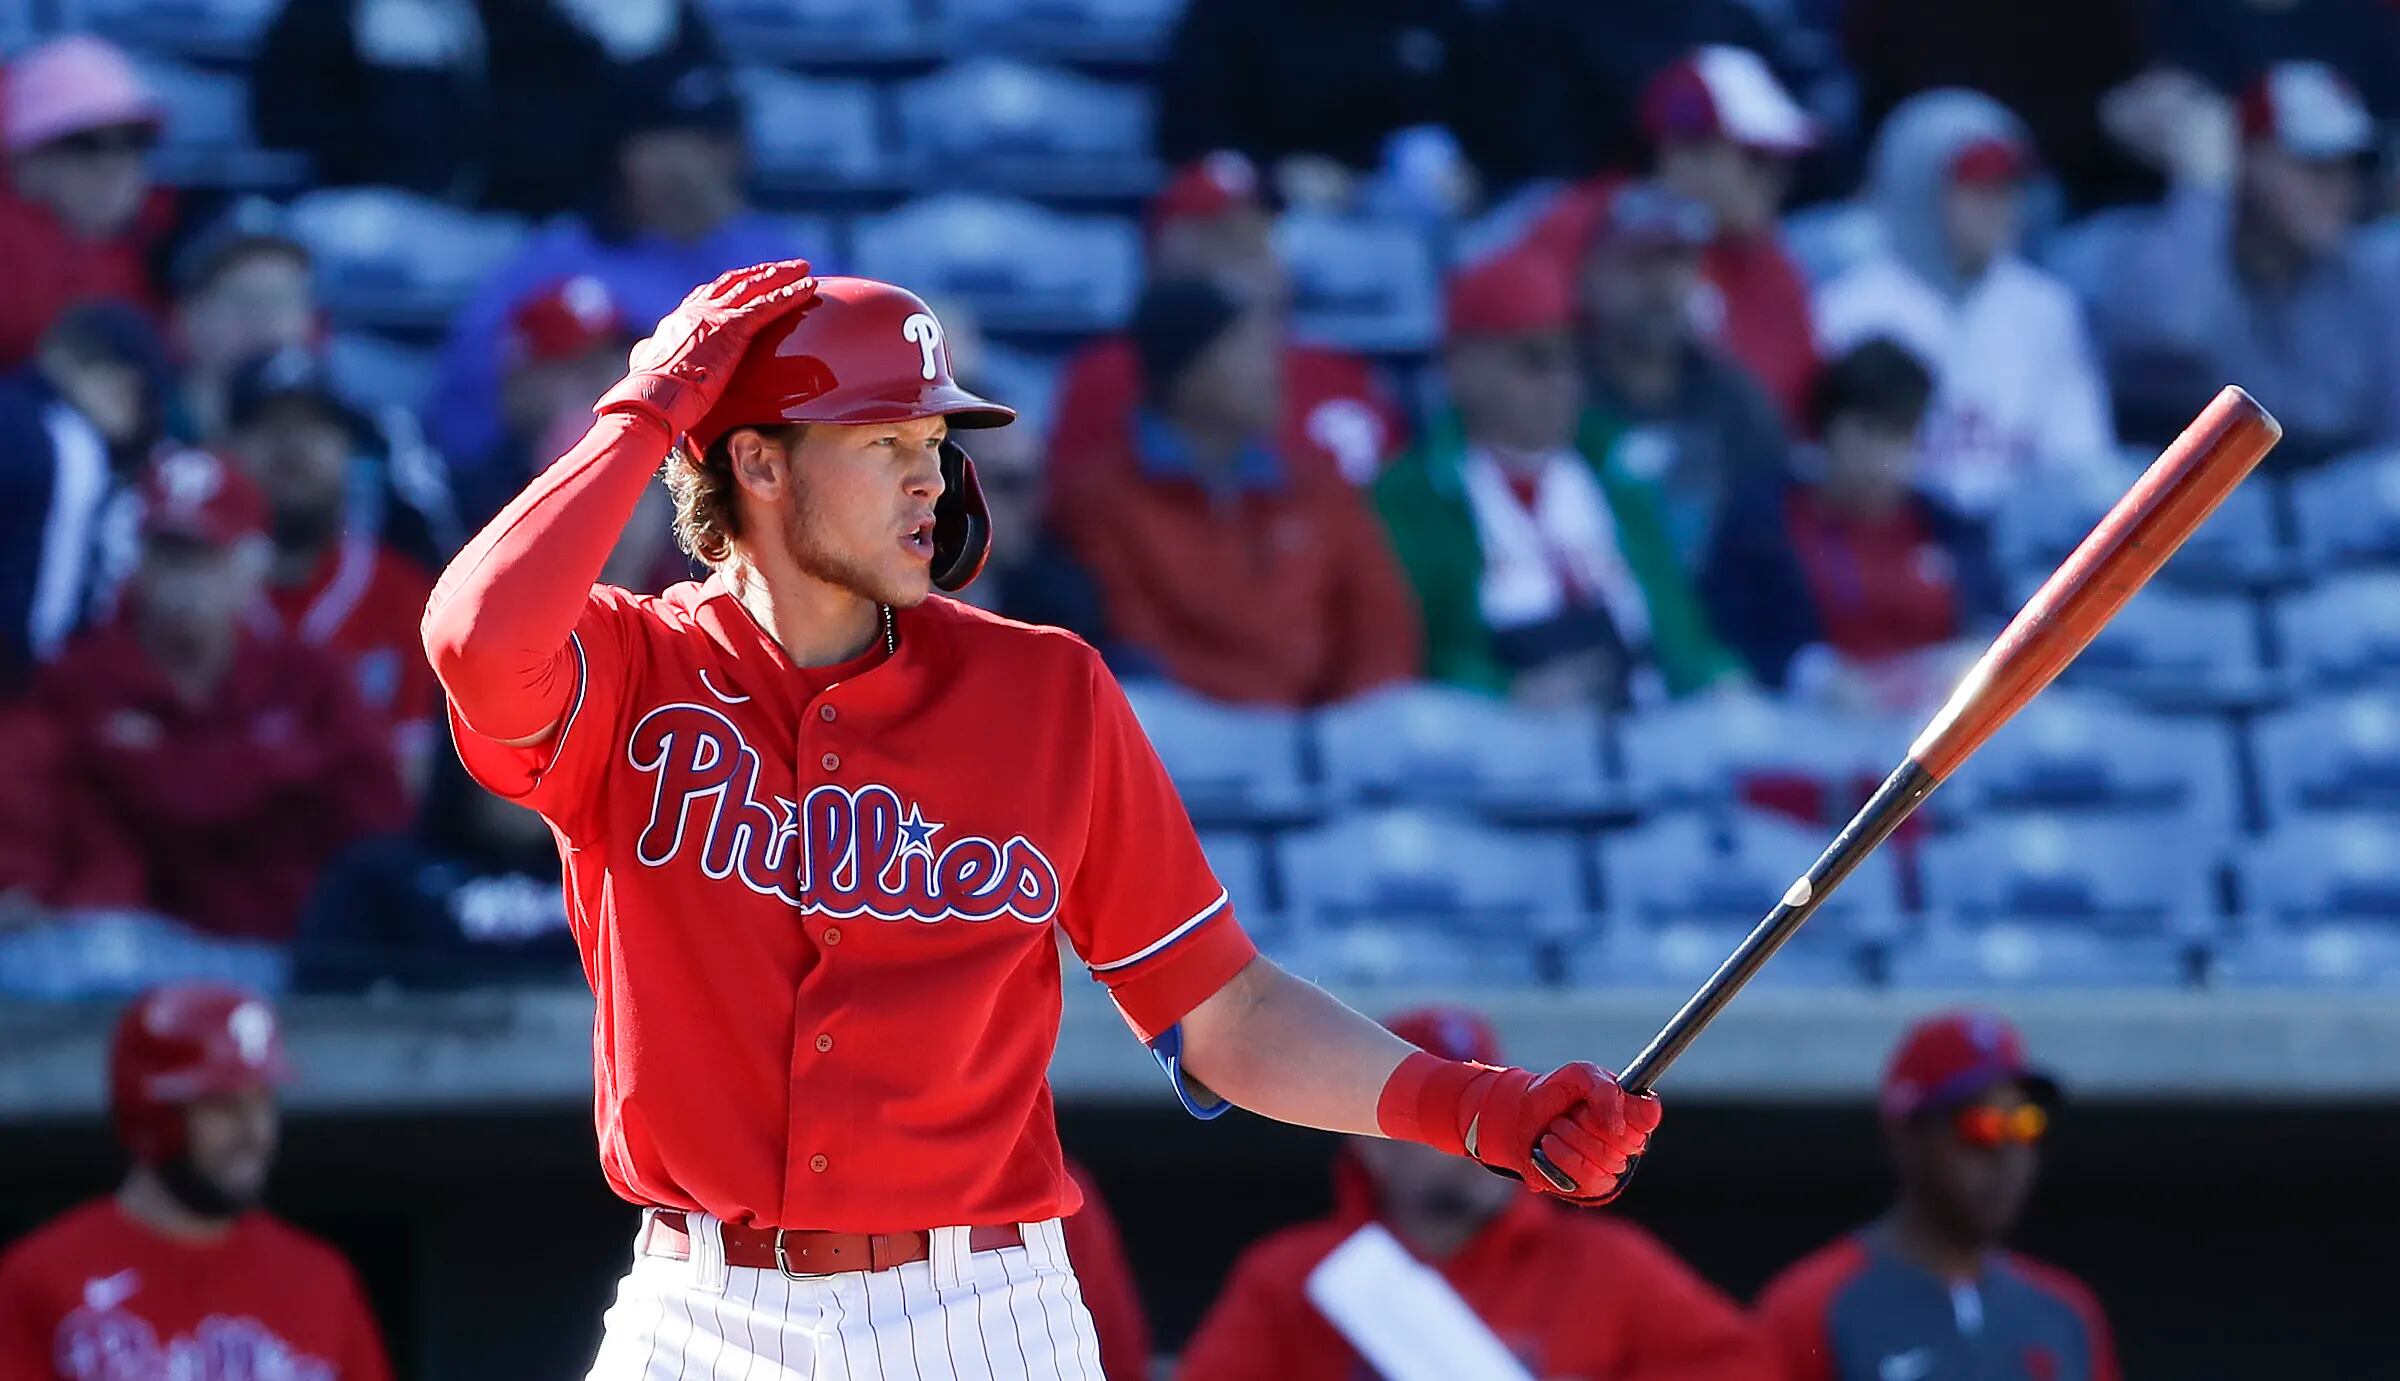 Inspired by Bryce Harper, Phillies prospect Bryson Stott imagines a future  as teammates